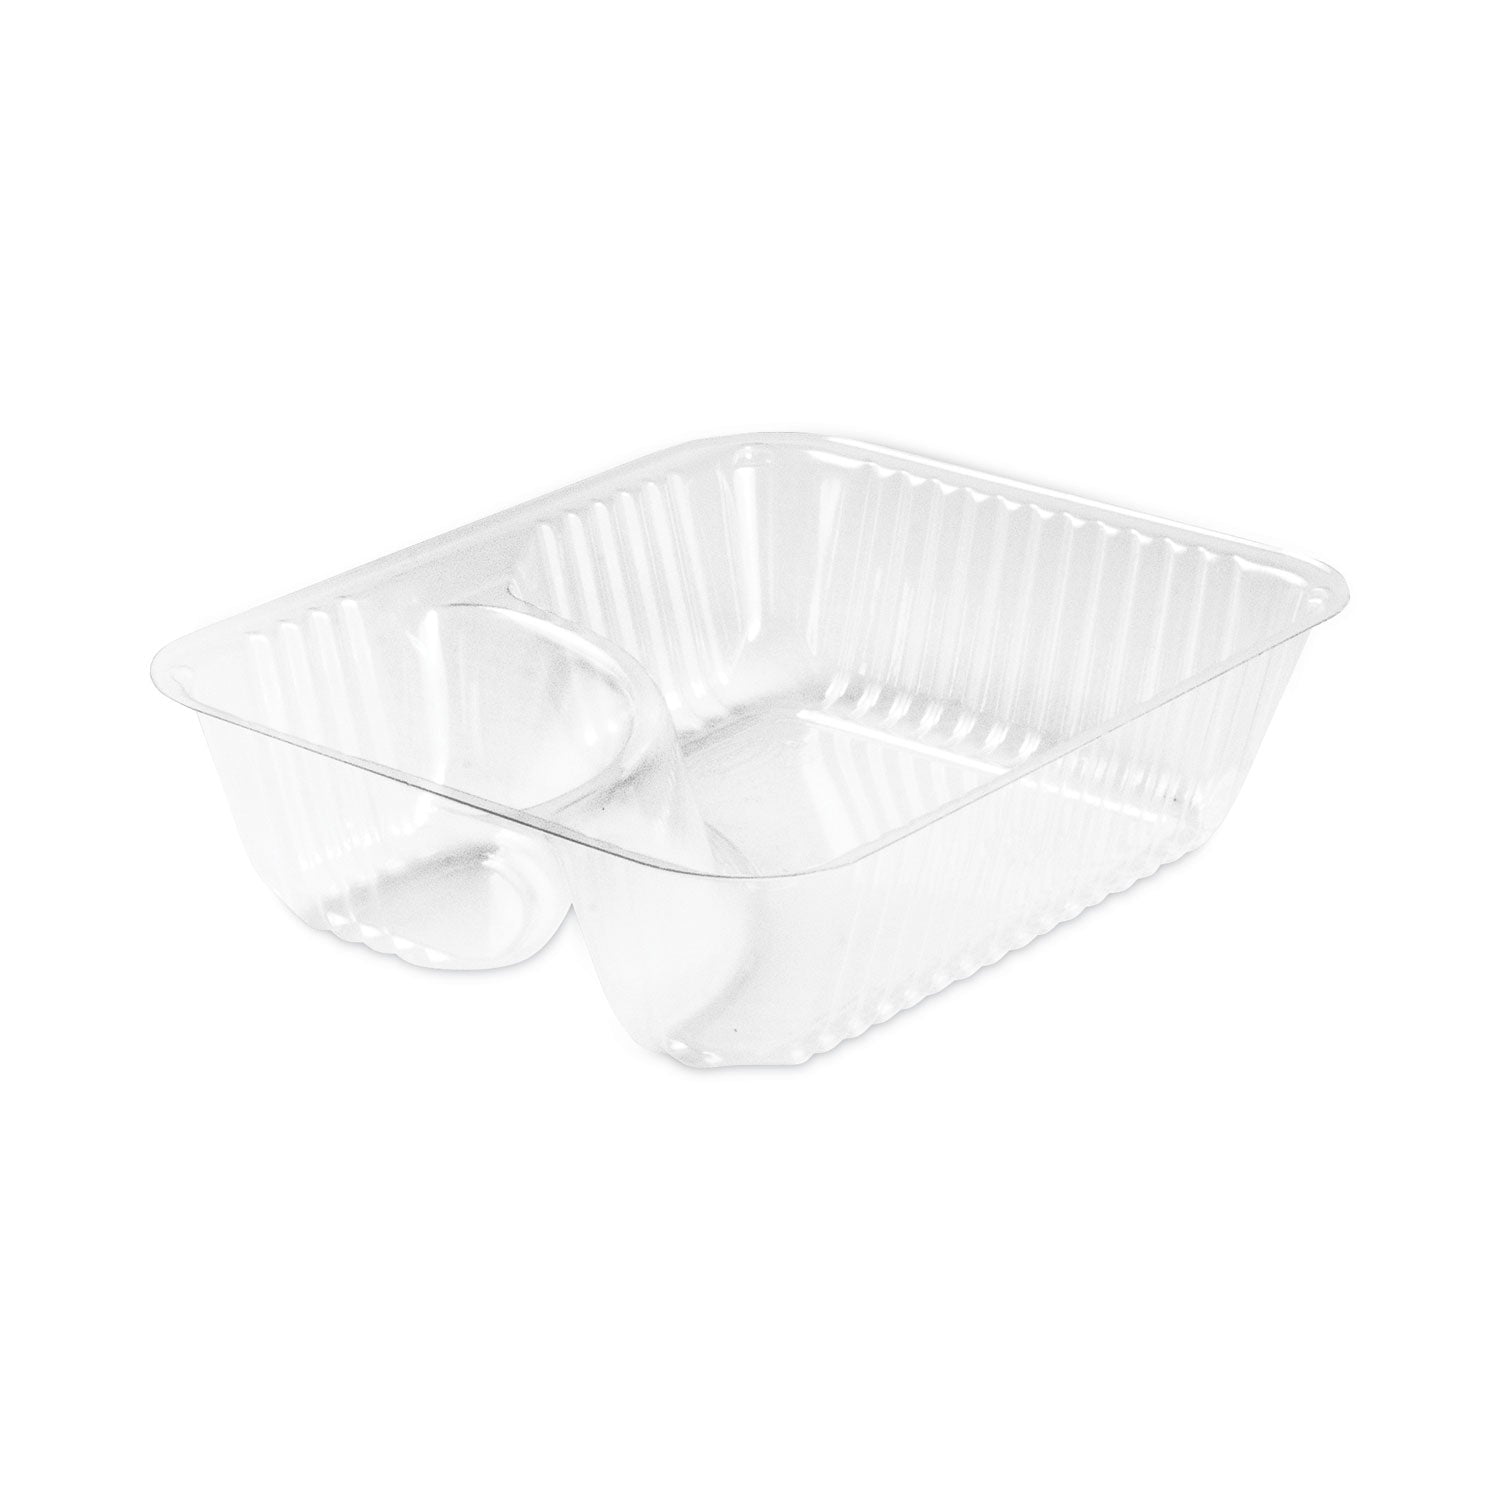 clearpac-small-nacho-tray-2-compartments-5-x-6-x-15-clear-plastic-125-bag-2-bags-carton_dccc56nt2 - 2